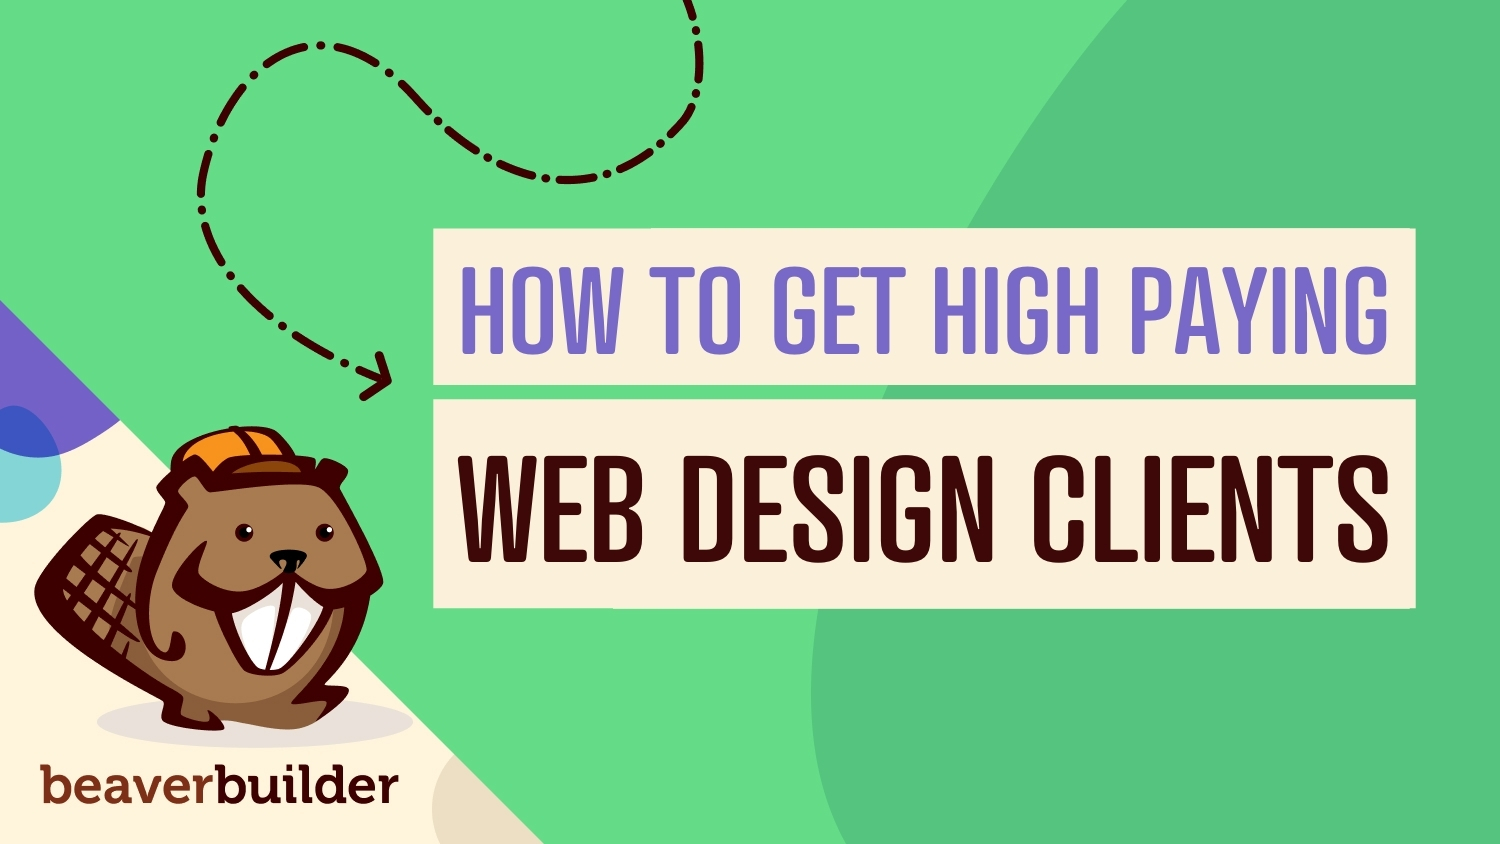 How to get high paying web design clients